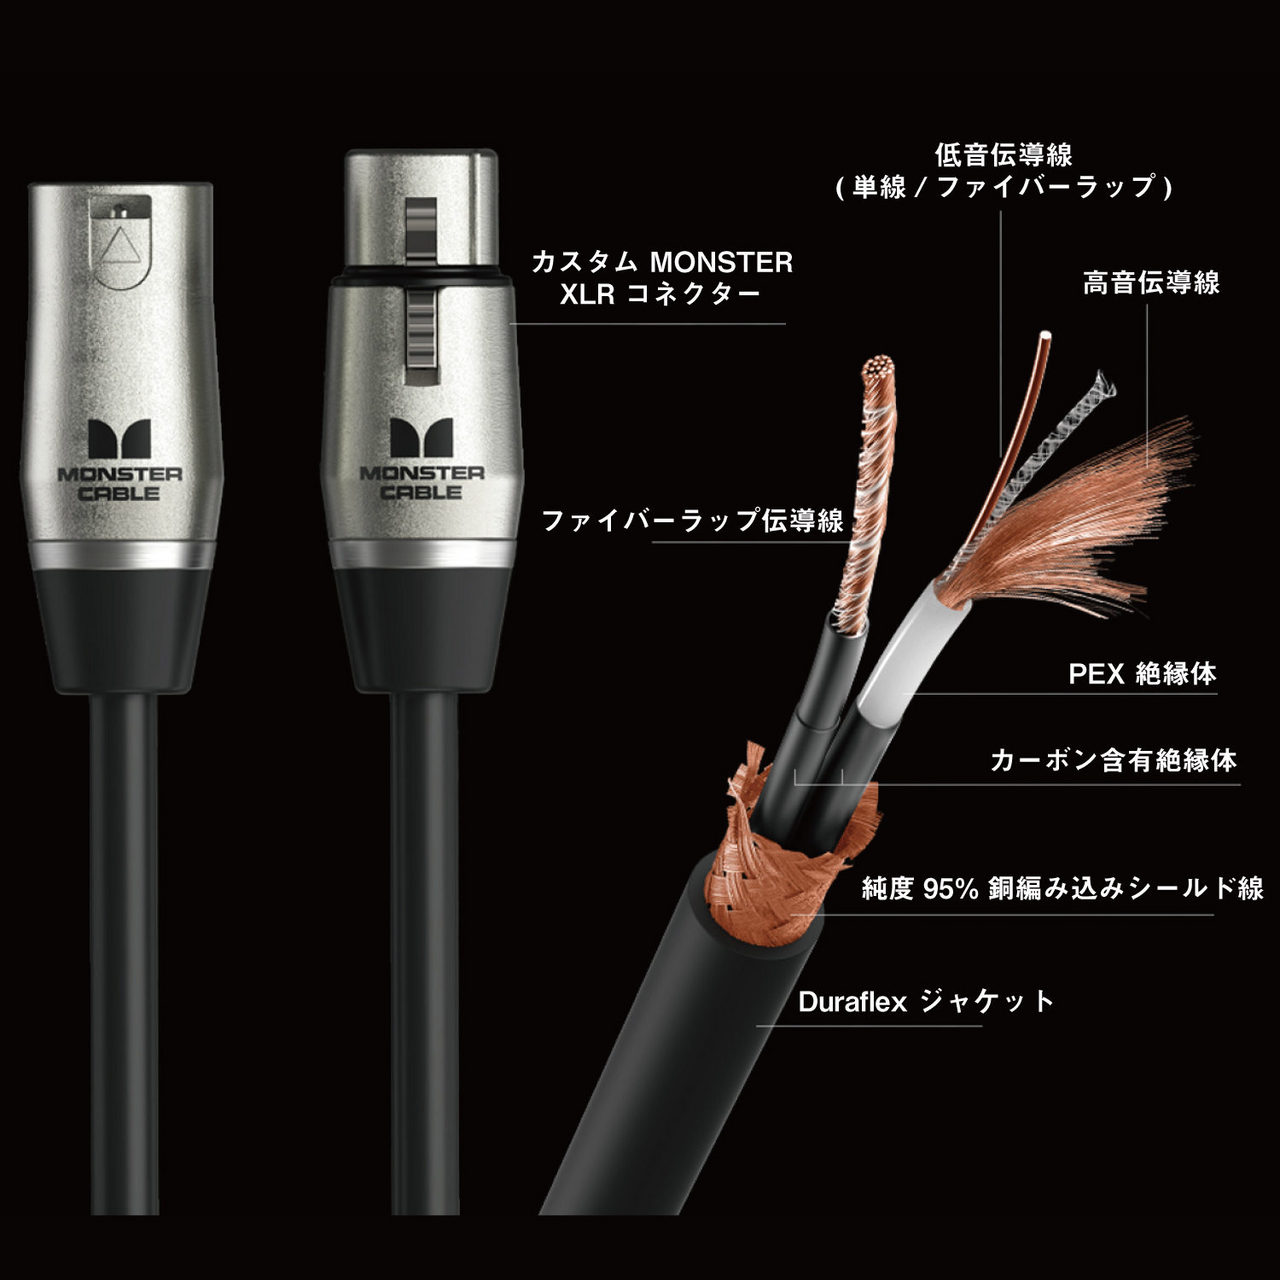 Monster Cable PERFORMER 600 MIC P600-M-20 マイクケーブル